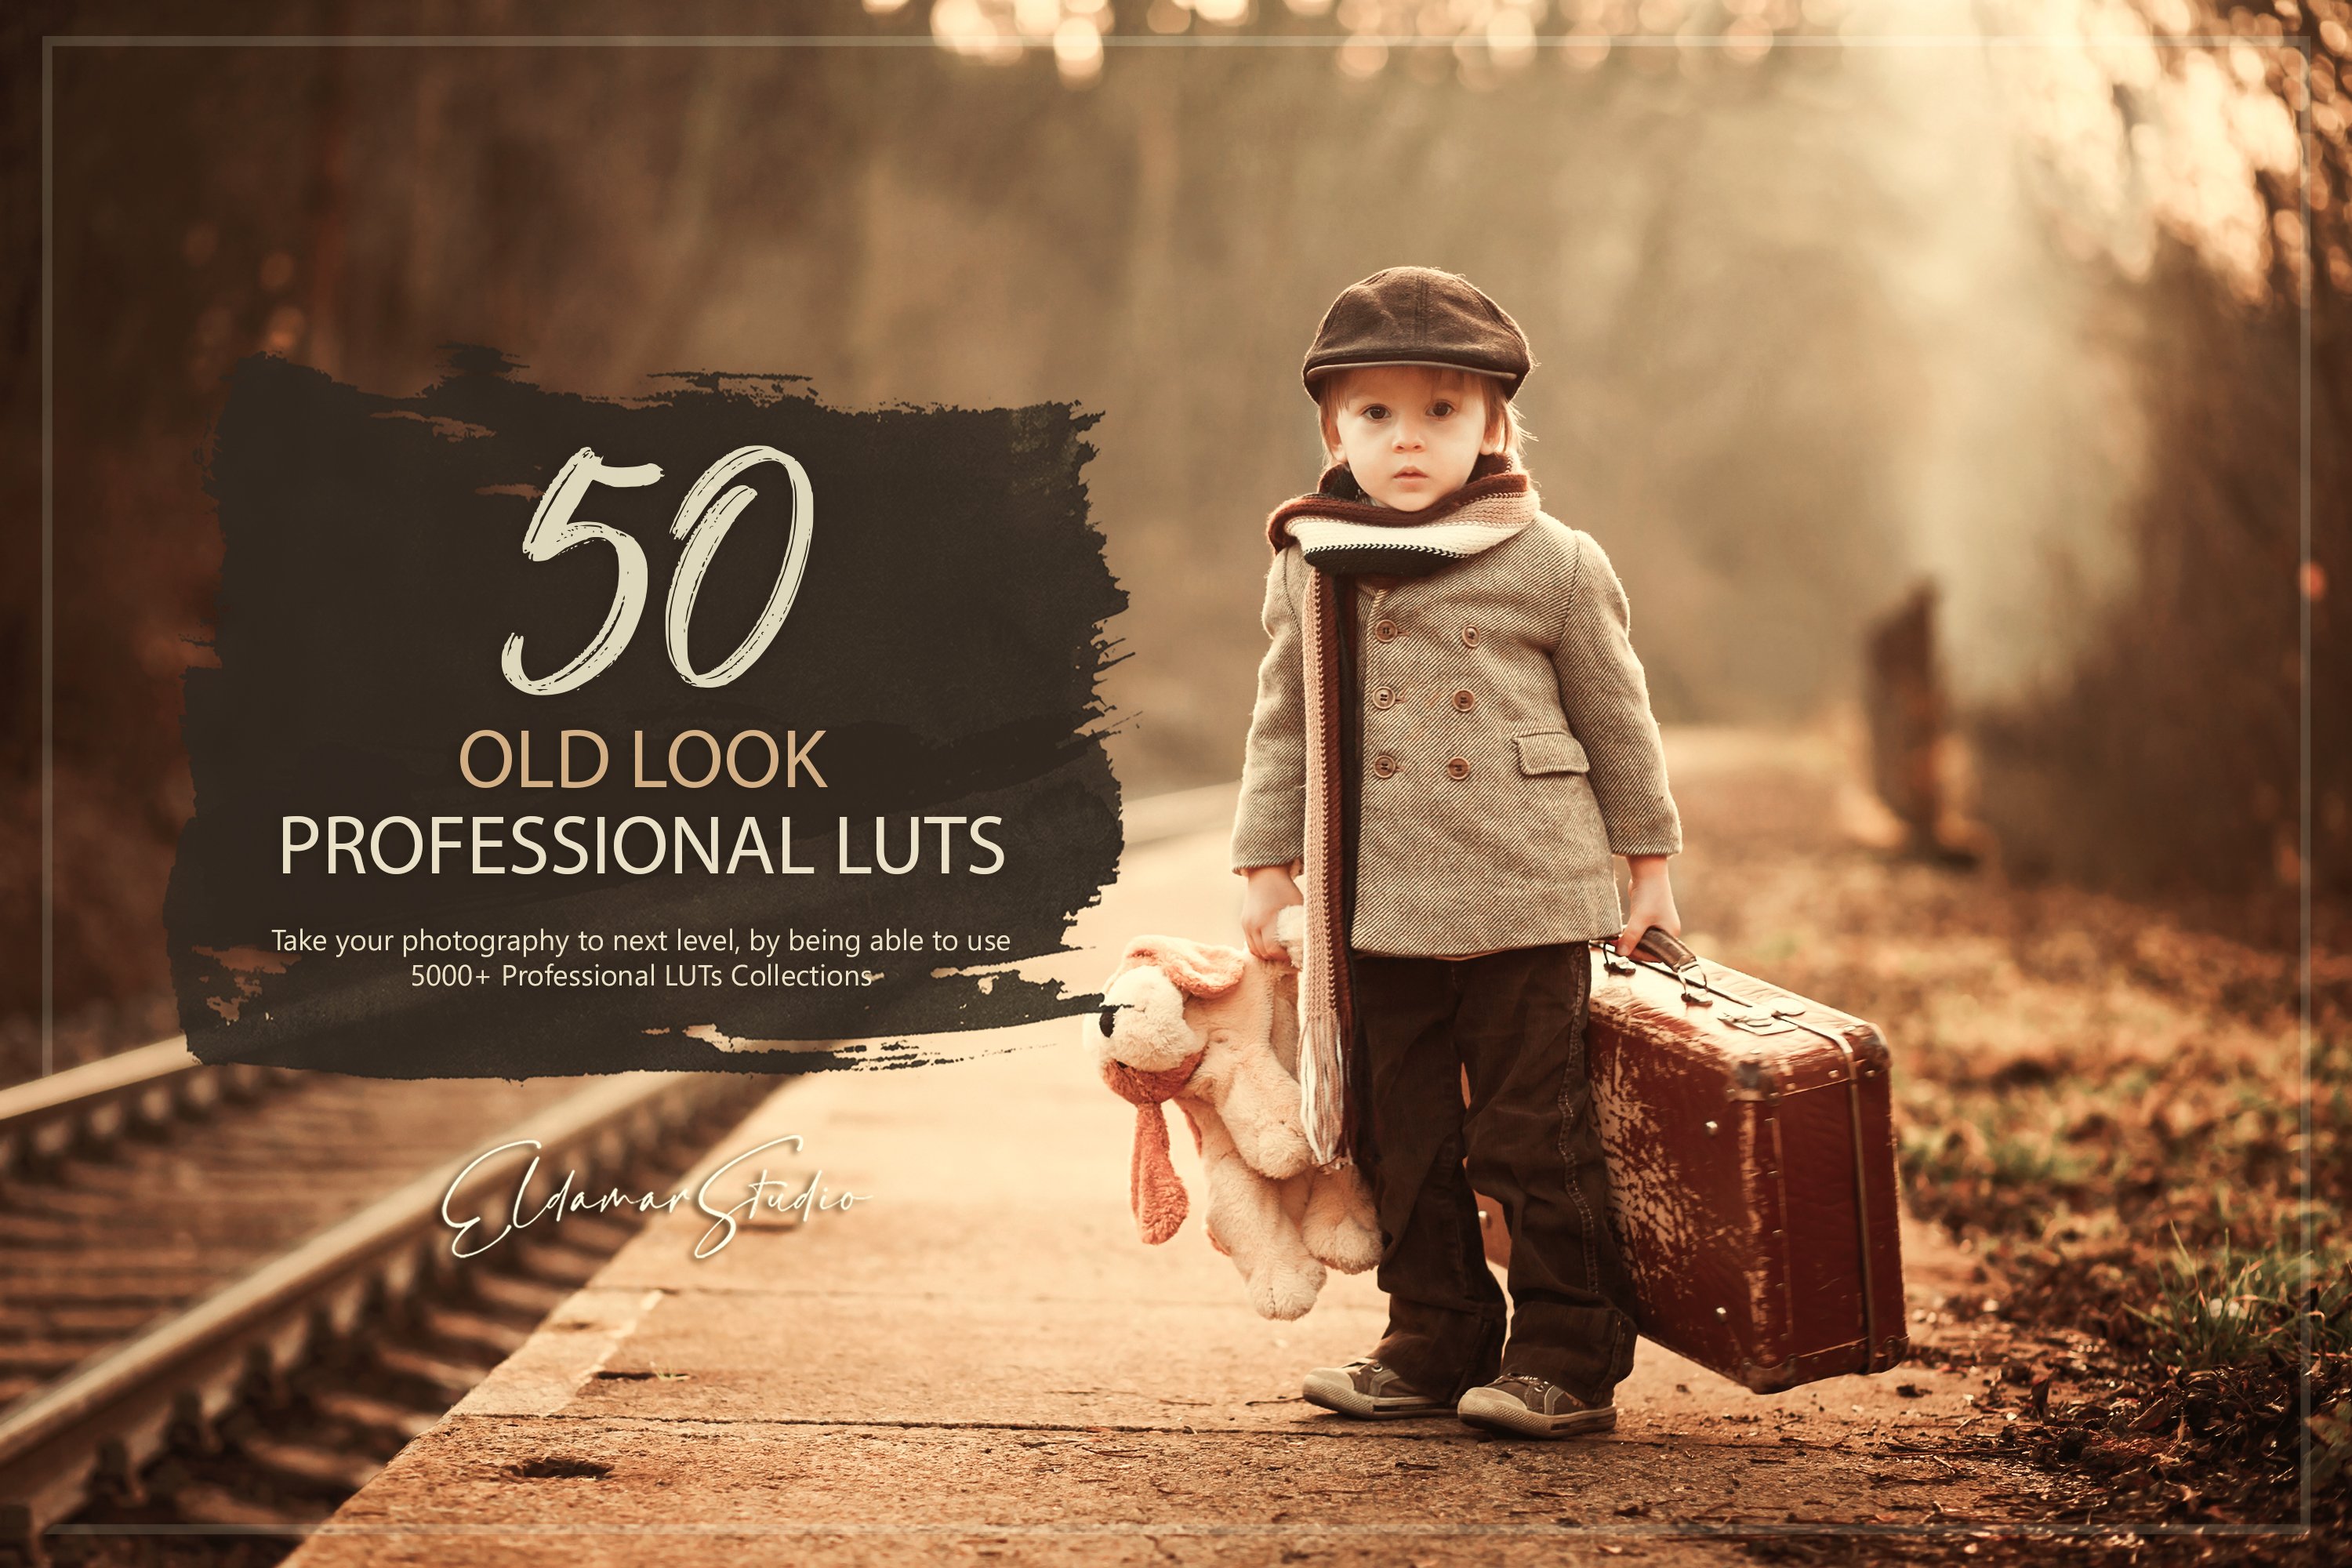 50 Old Look LUTs Packcover image.